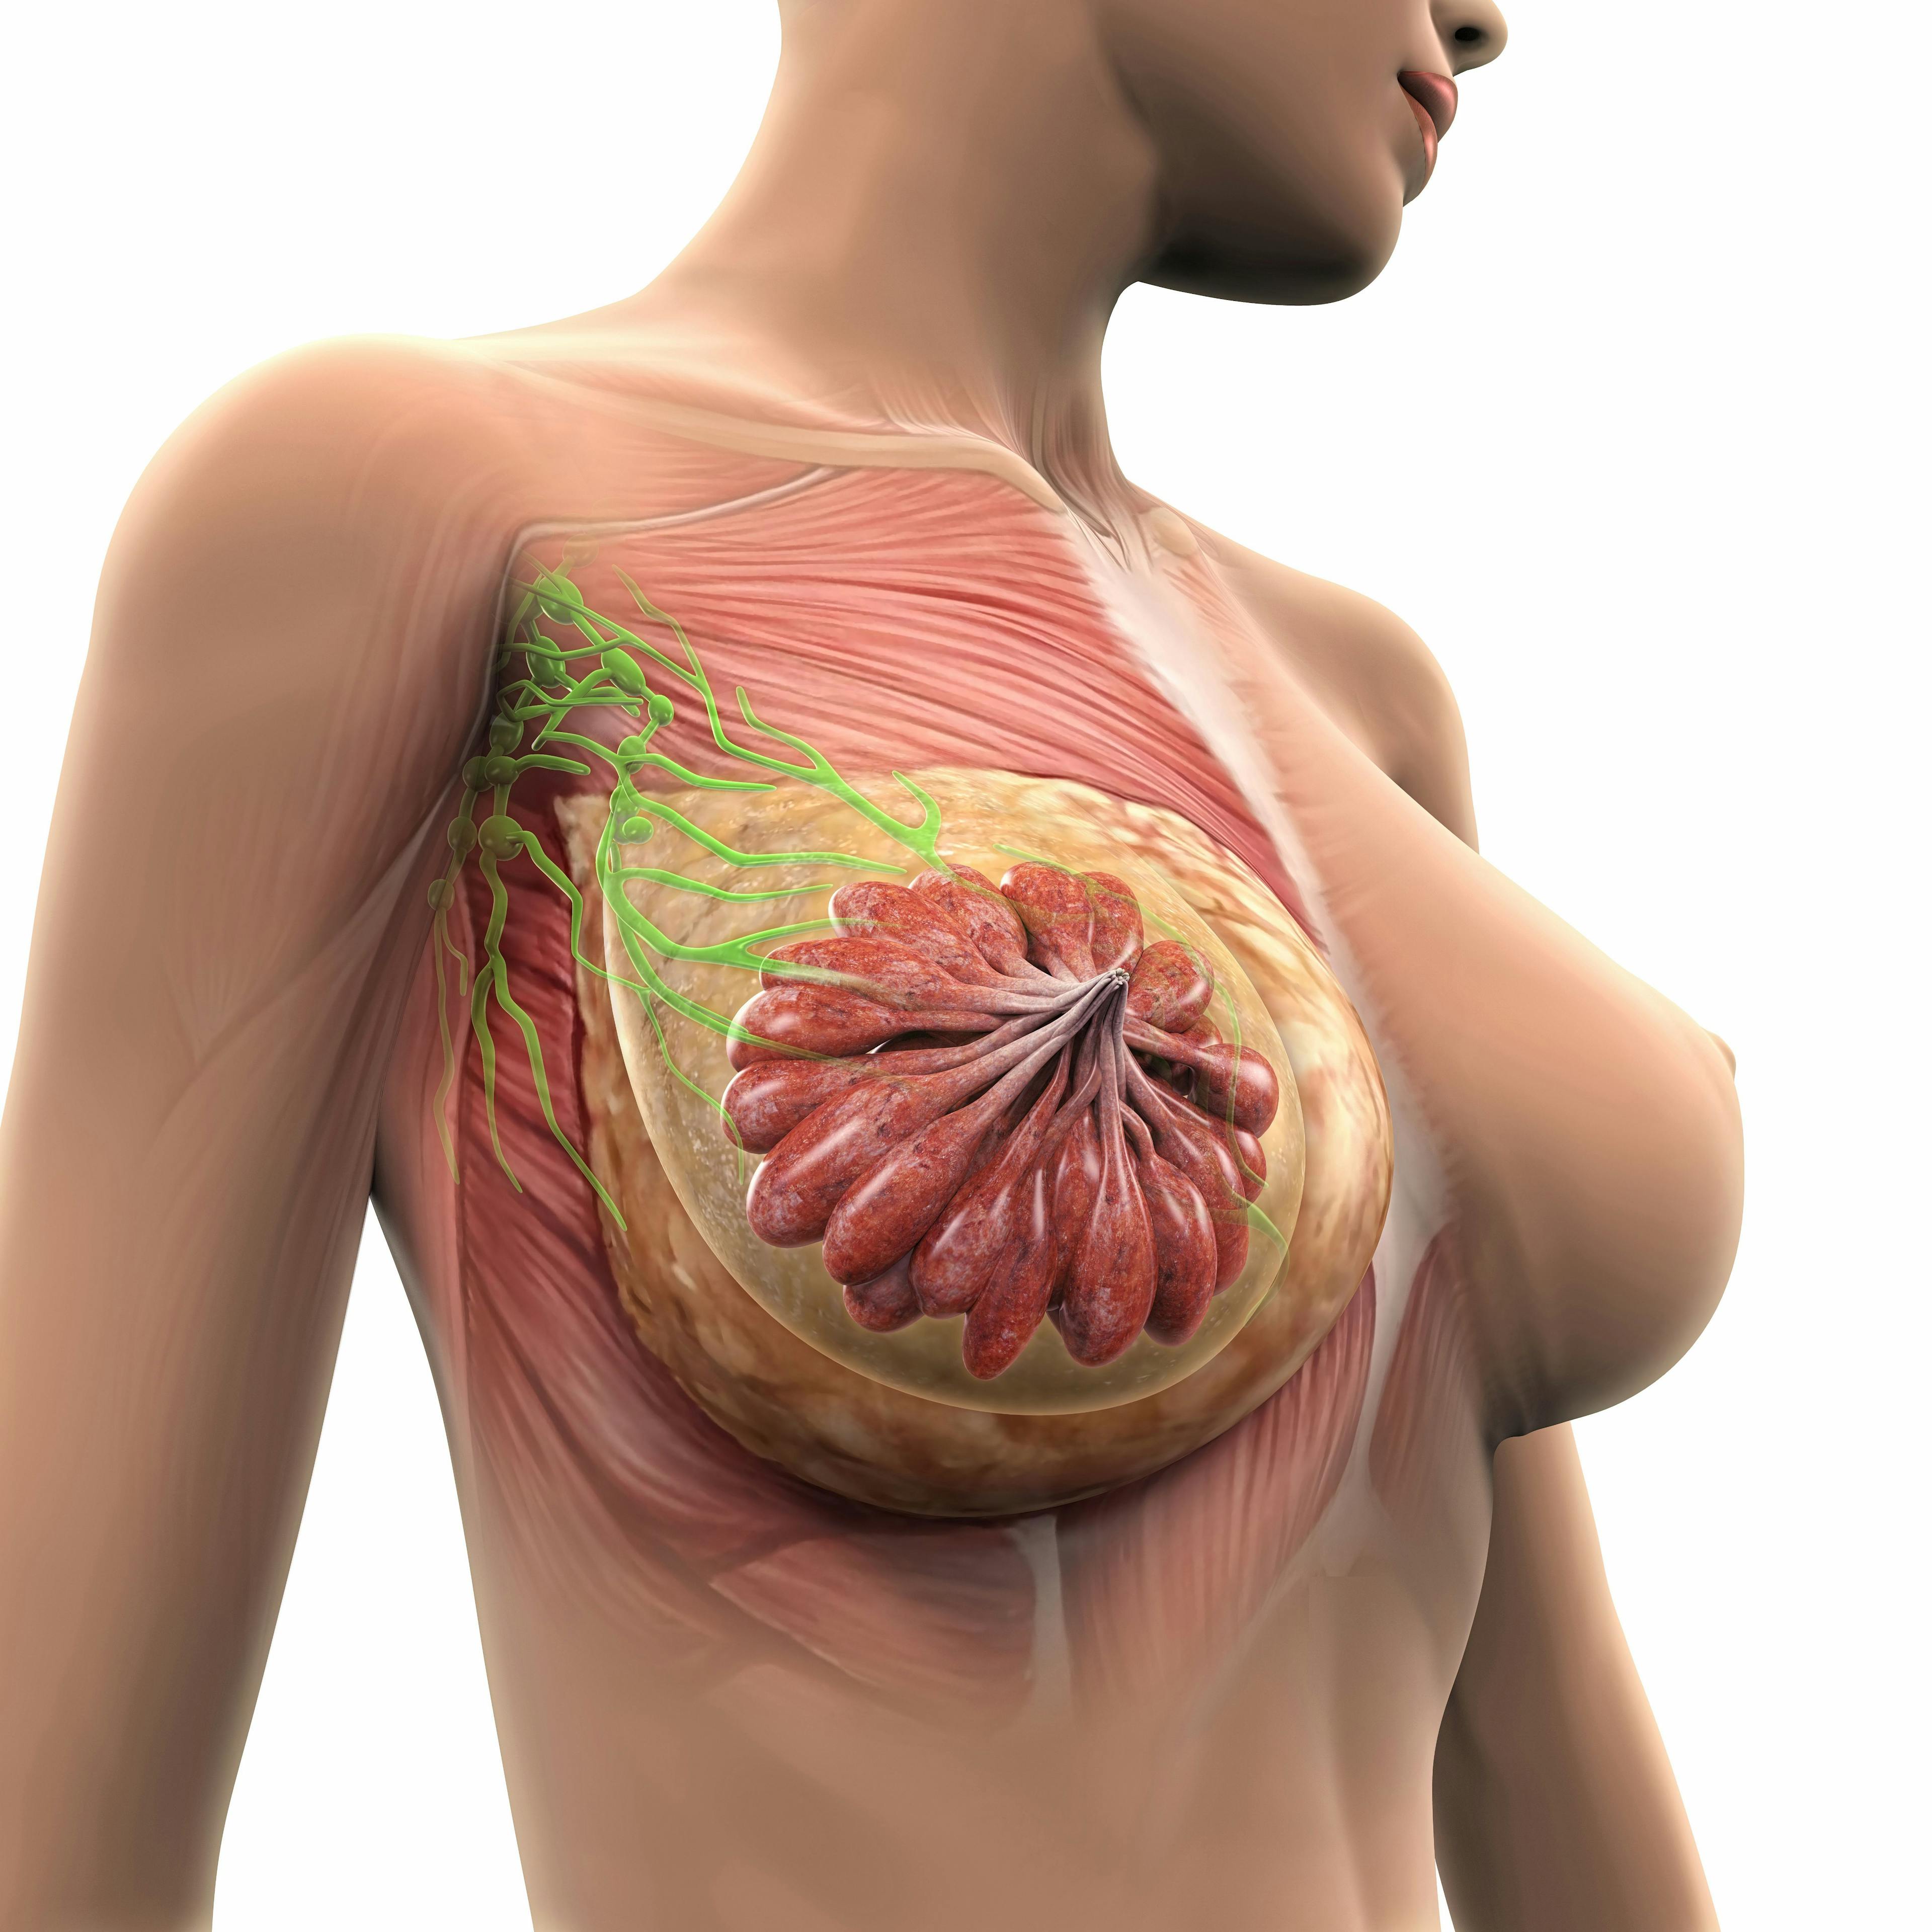 Five-year data from the monarchE trial support adding adjuvant abemaciclib to endocrine therapy for patients with hormone receptor–positive, HER2-negative breast cancer.